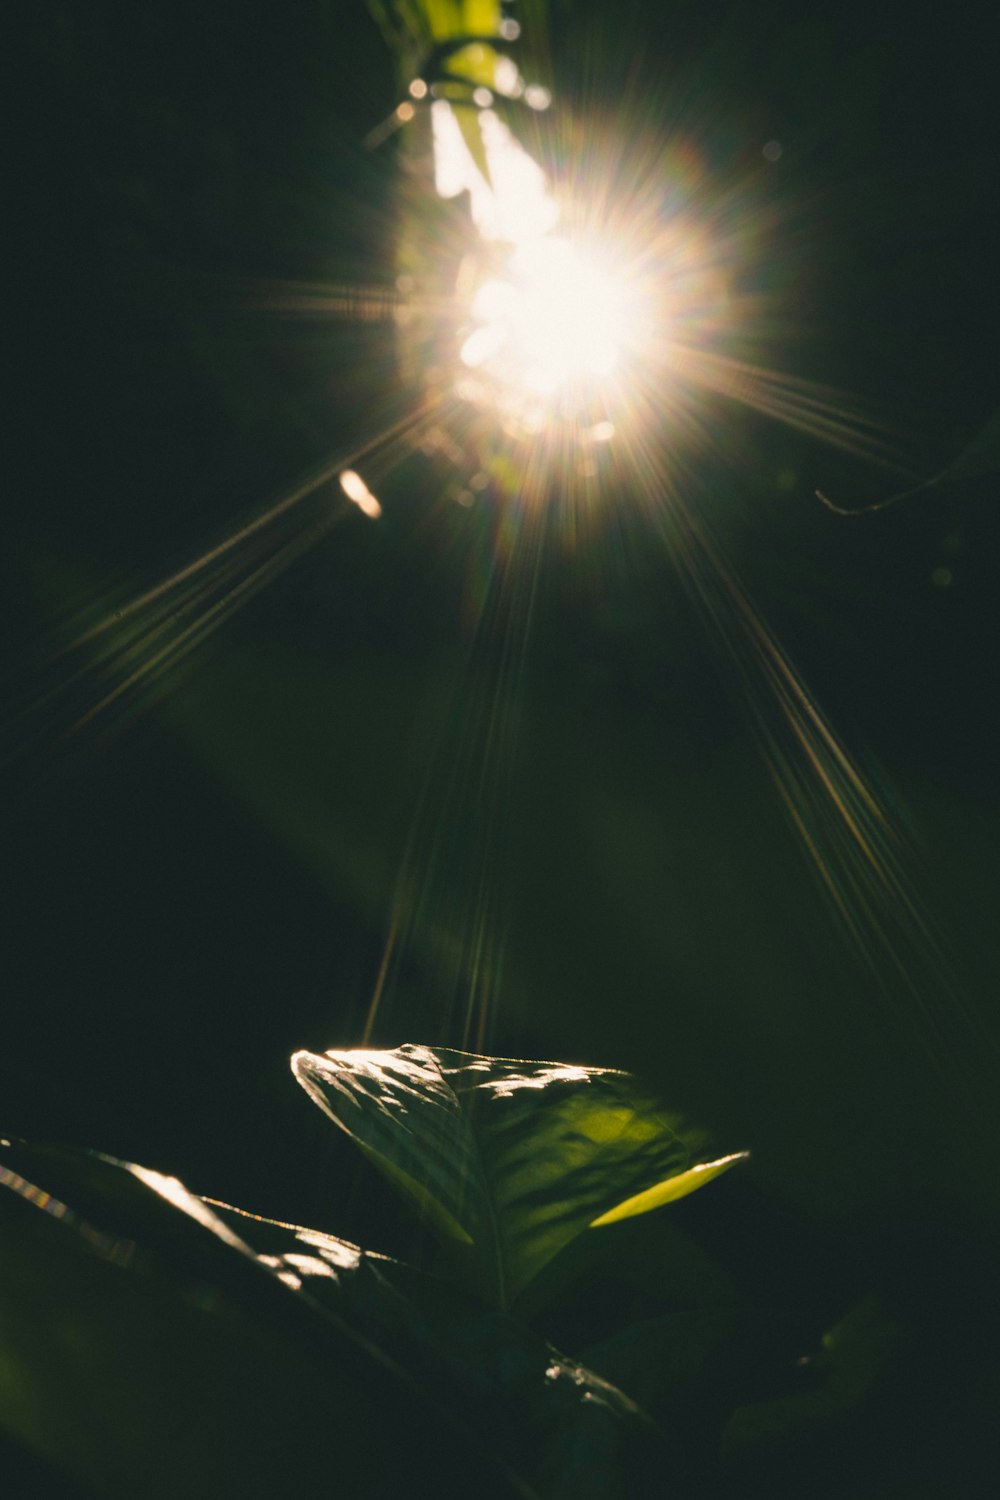 the sun shines brightly through the leaves of a plant